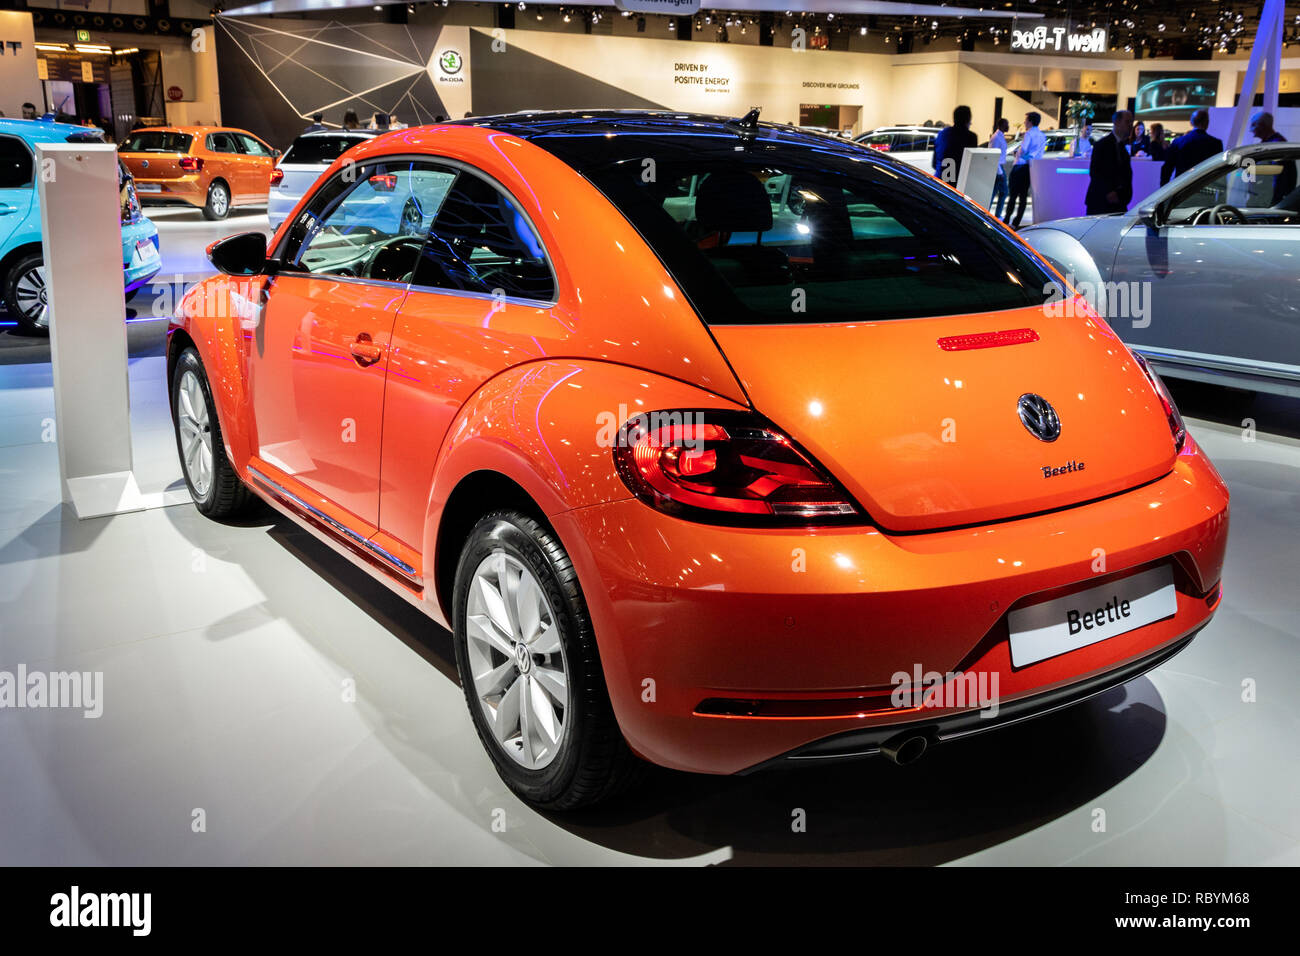 BRUSSELS - JAN 10, 2018: Volkswagen Beetle car showcased at the Brussels Expo Autosalon motor show. Stock Photo